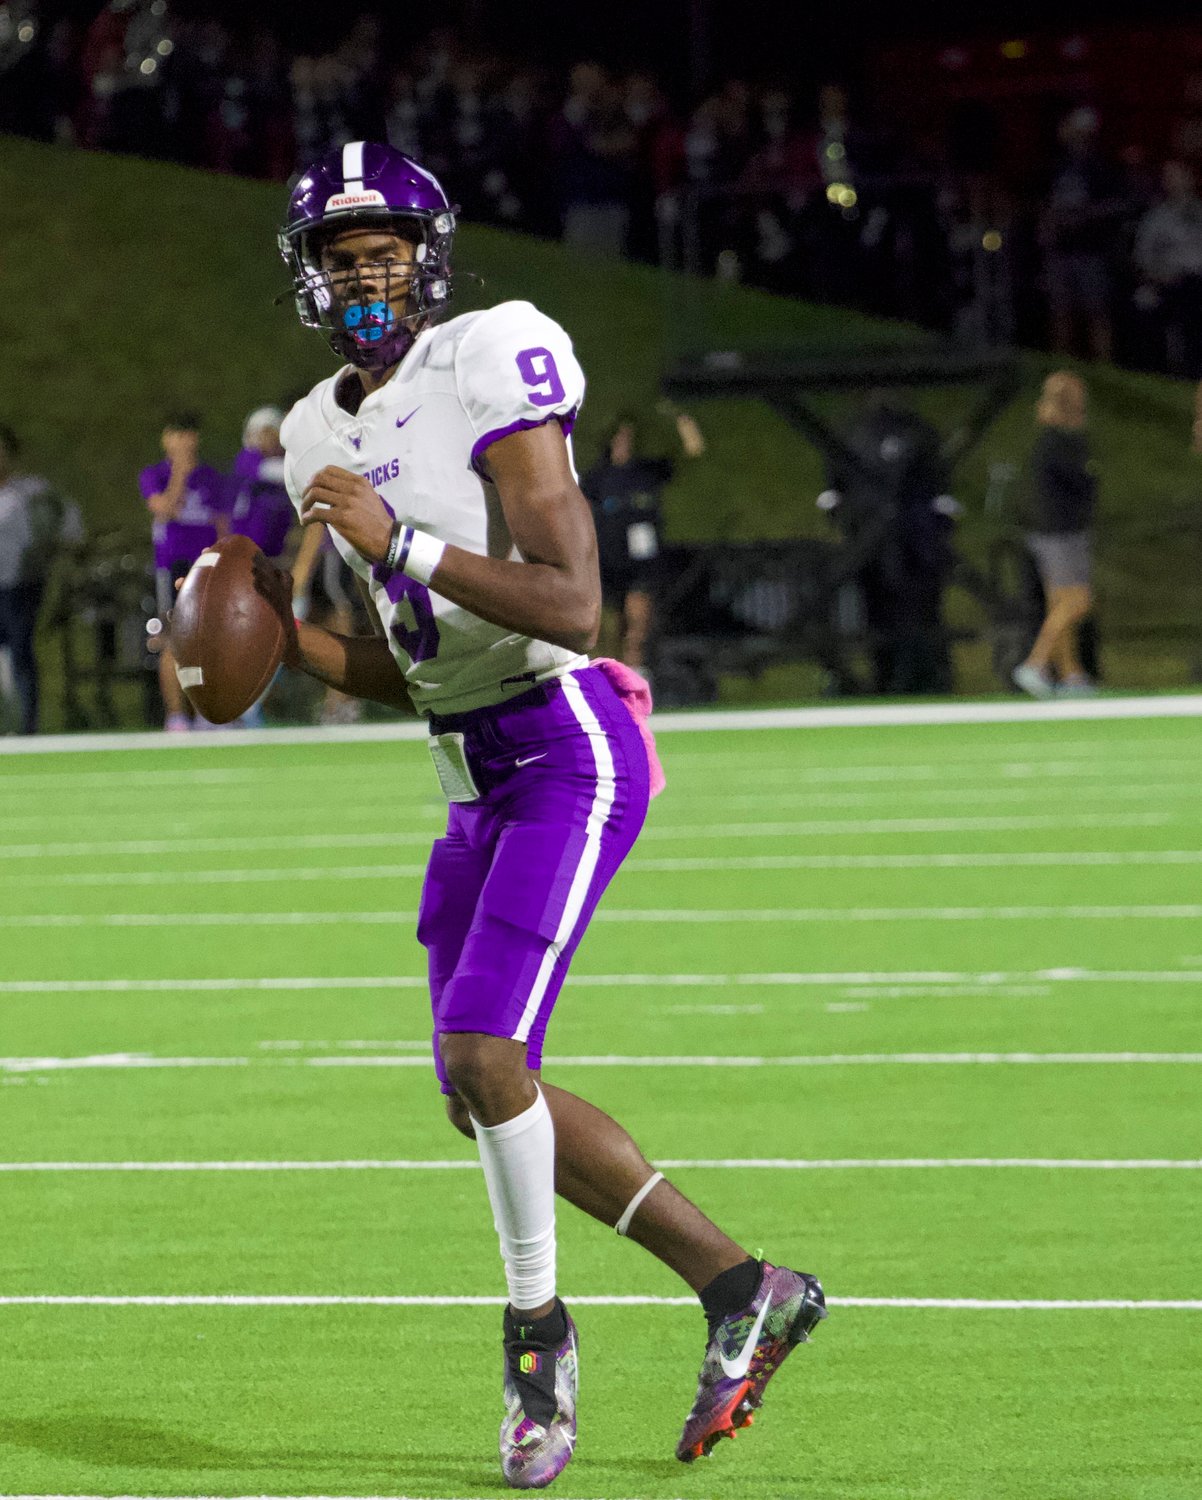 Josh Johnson looks downfield during Thursday's game between Tompkins and Morton Ranch at Rhodes Stadium.